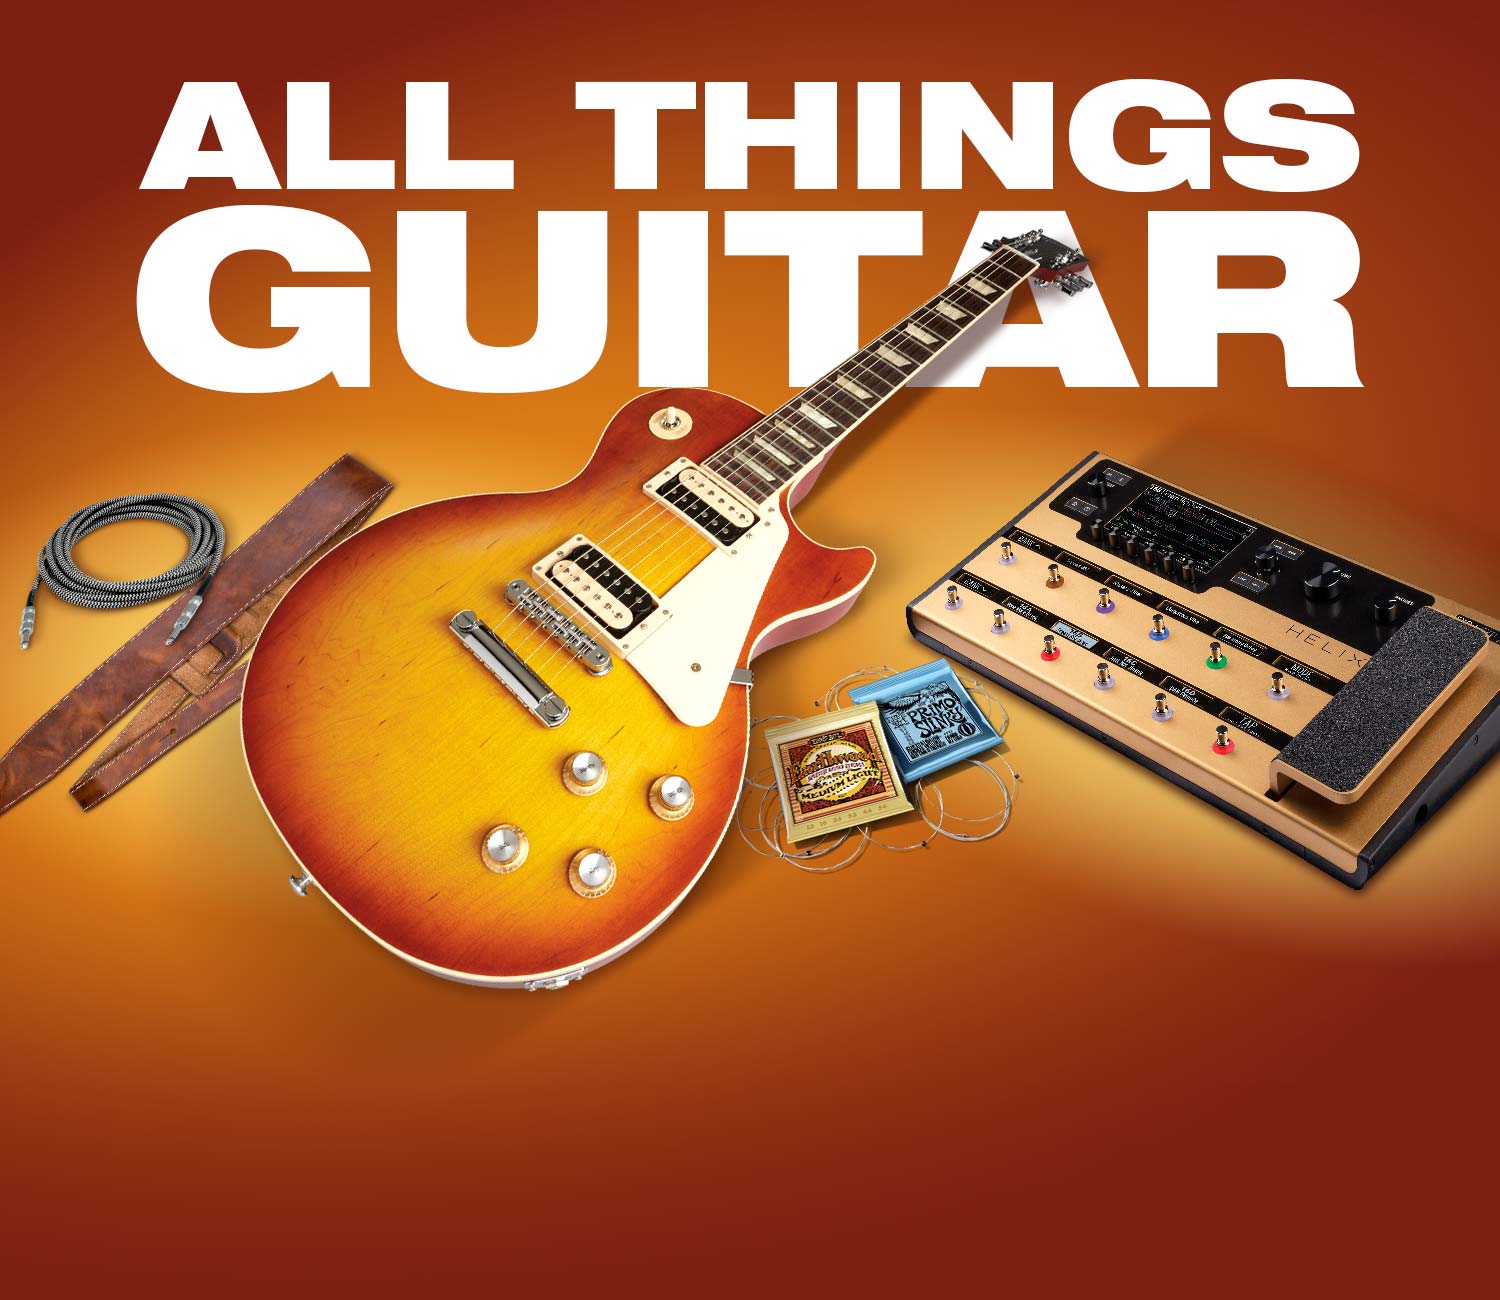 All Things Guitar. Limited-time deals. The hottest new gear.